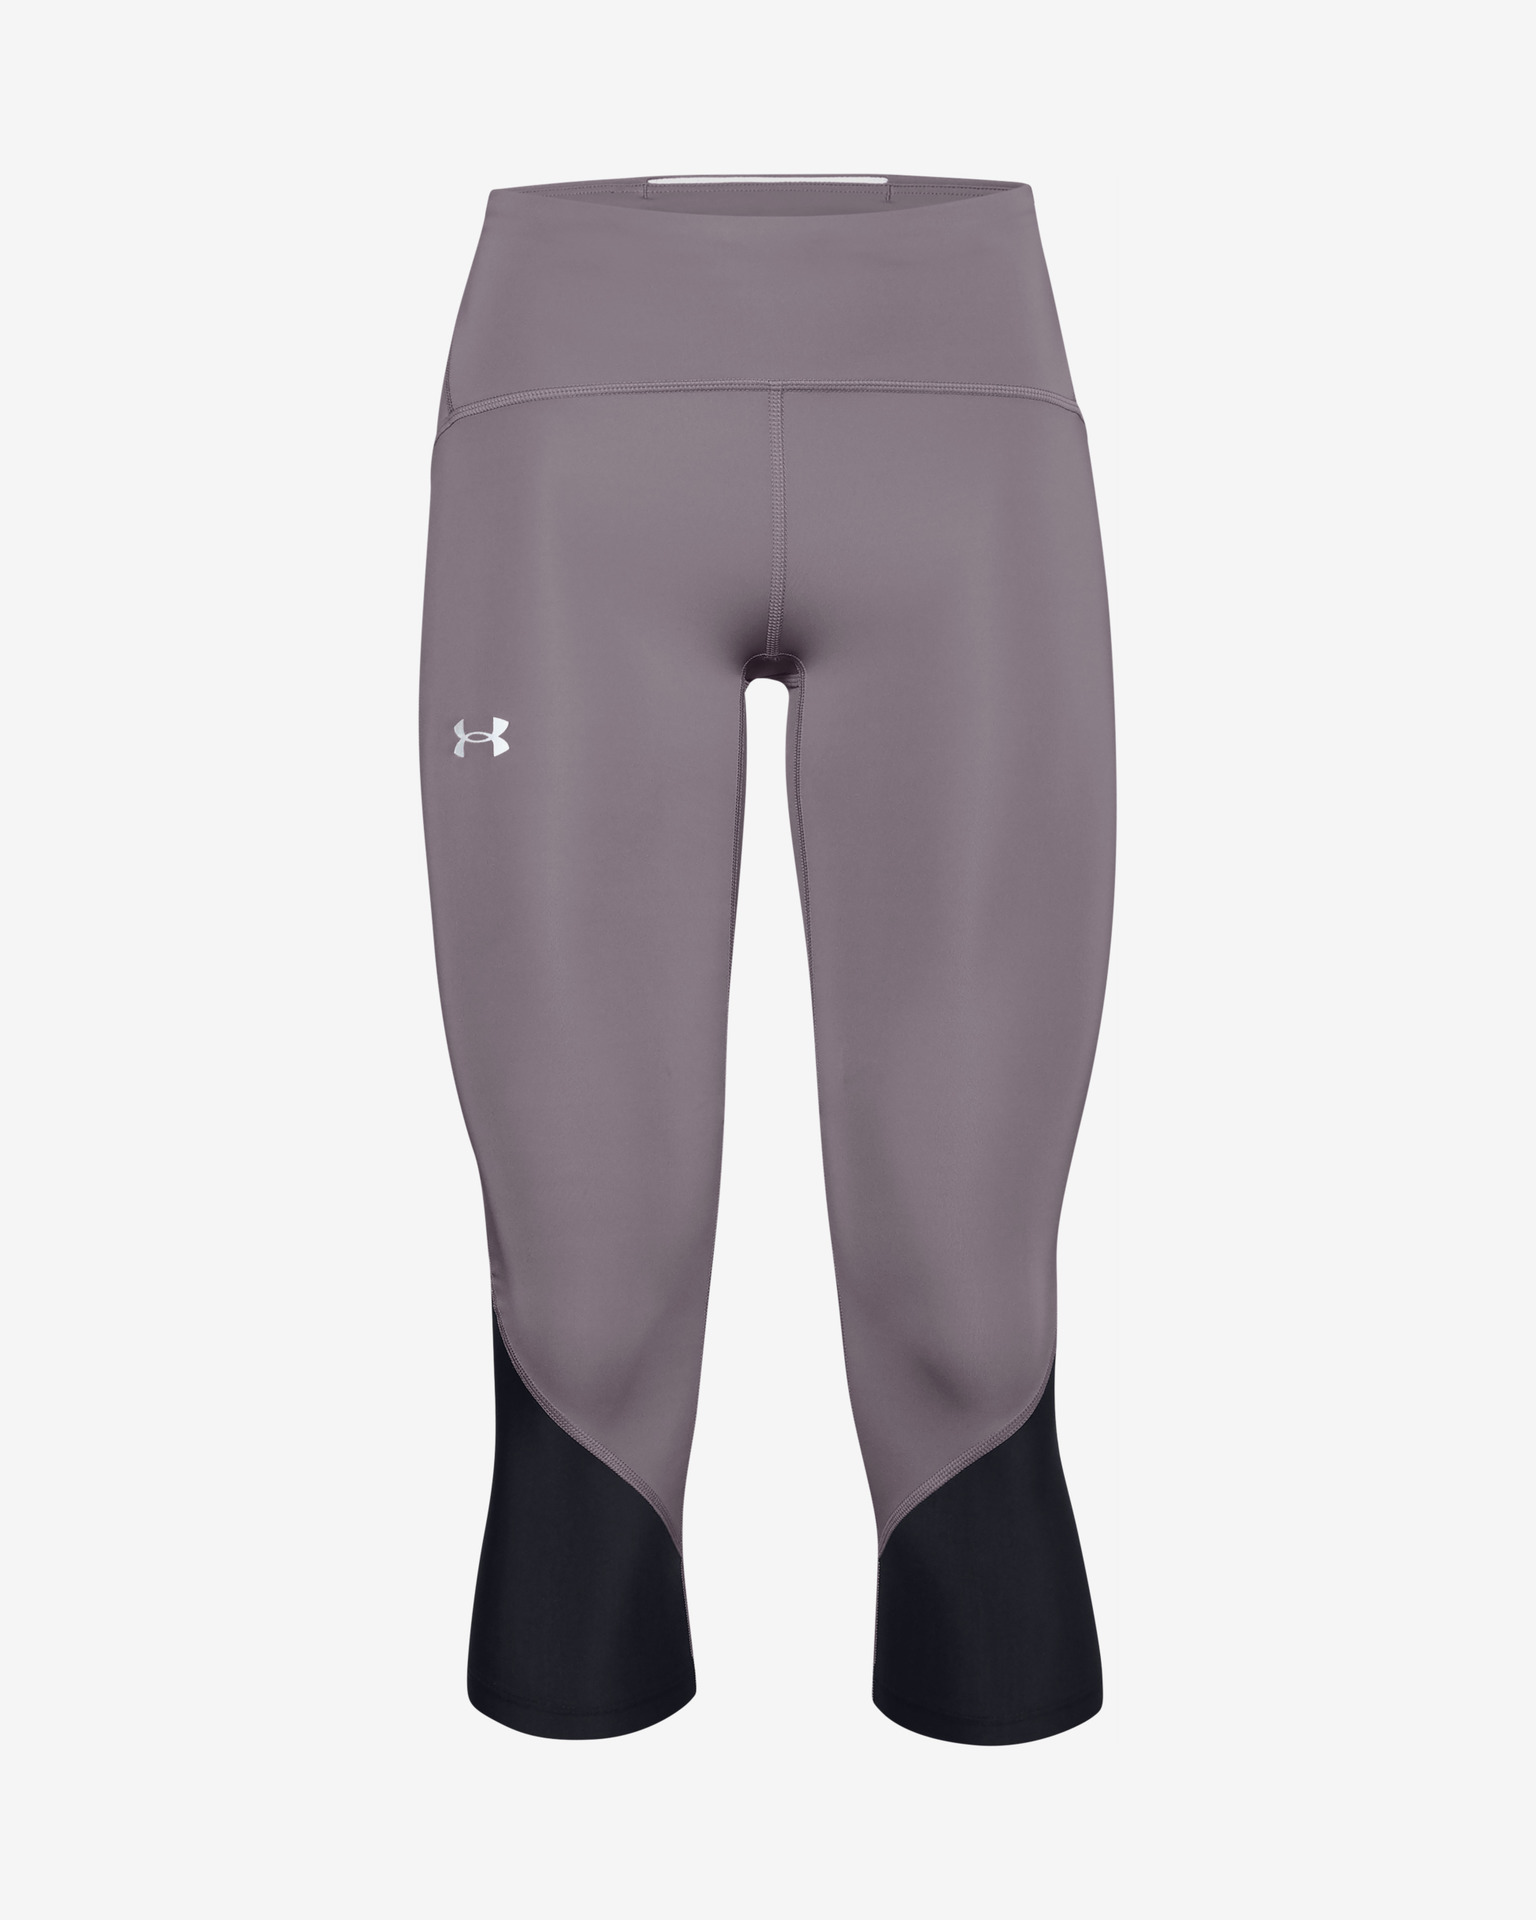 Under Armour Women's Fly Fast Crop